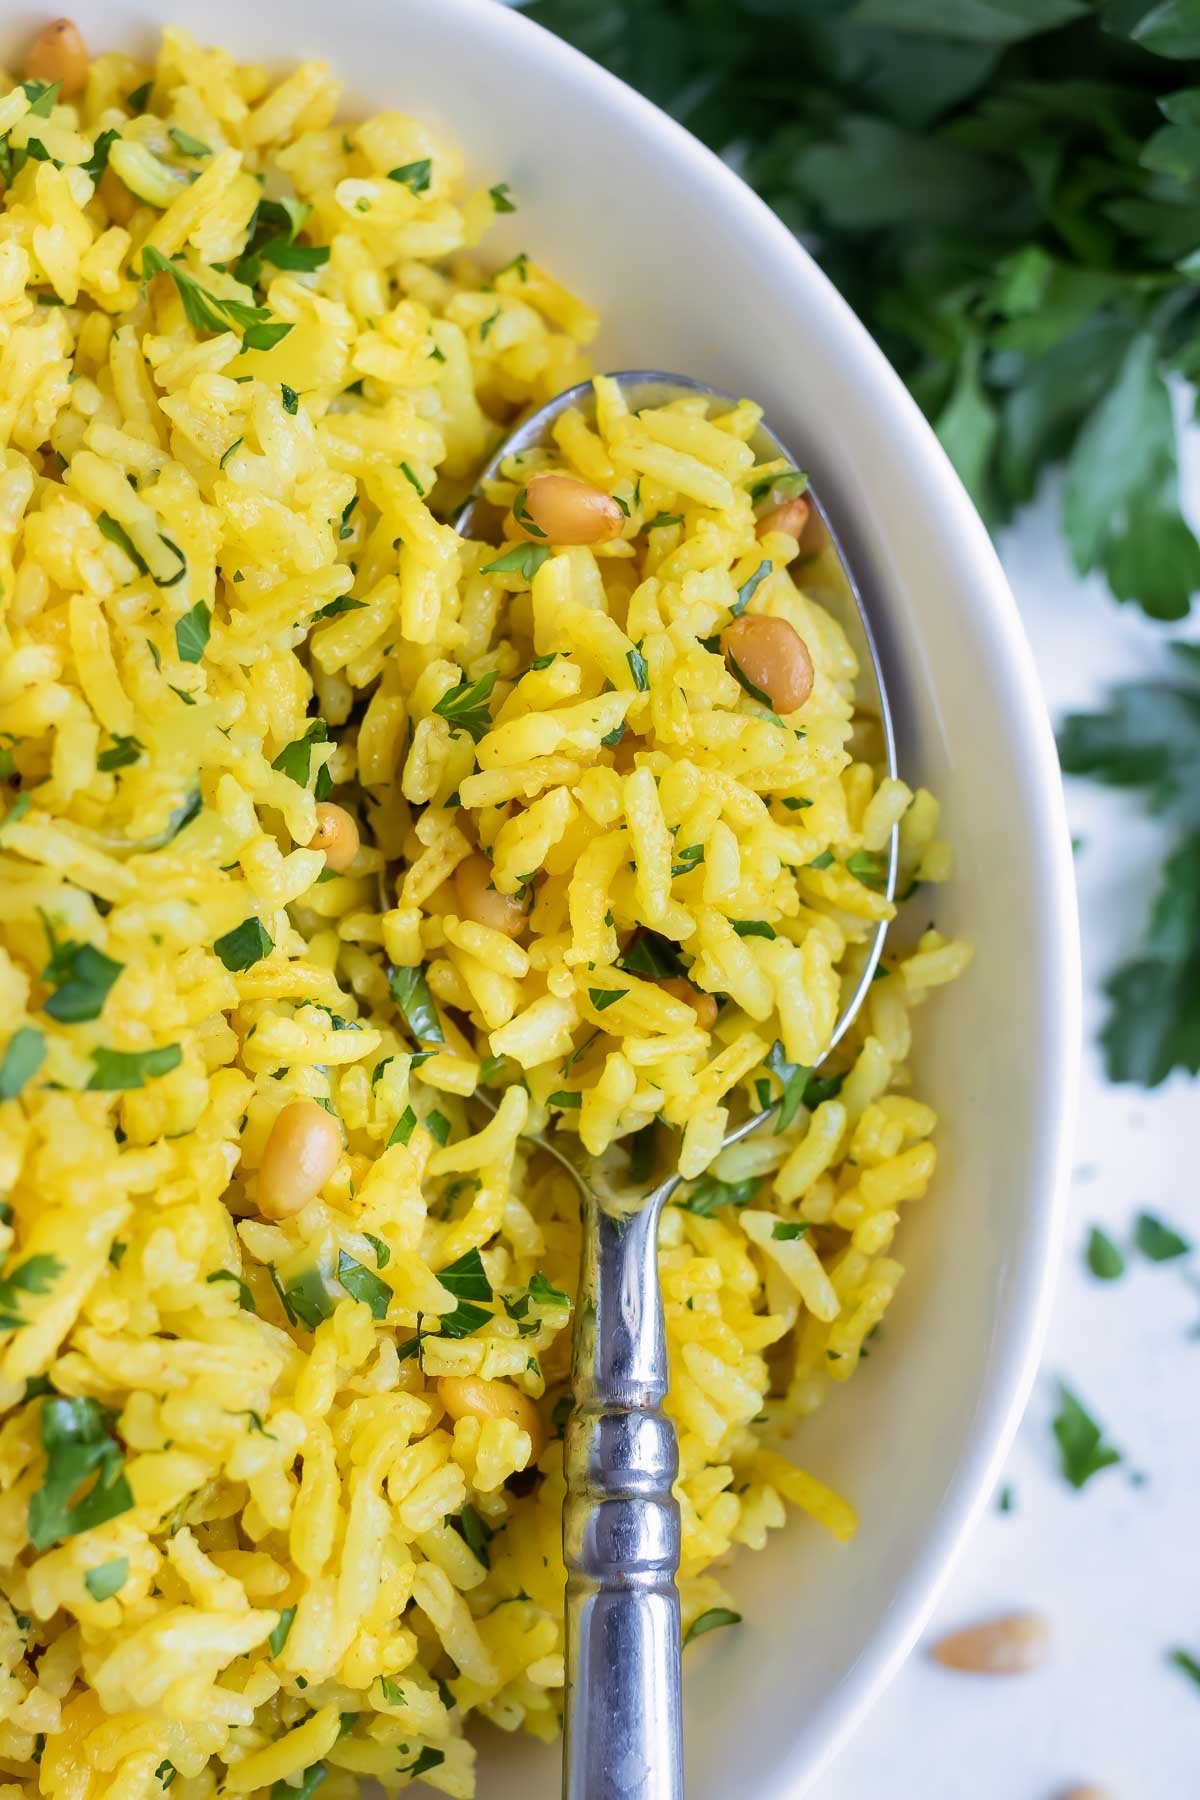 Yellow rice is served with a metal spoon.